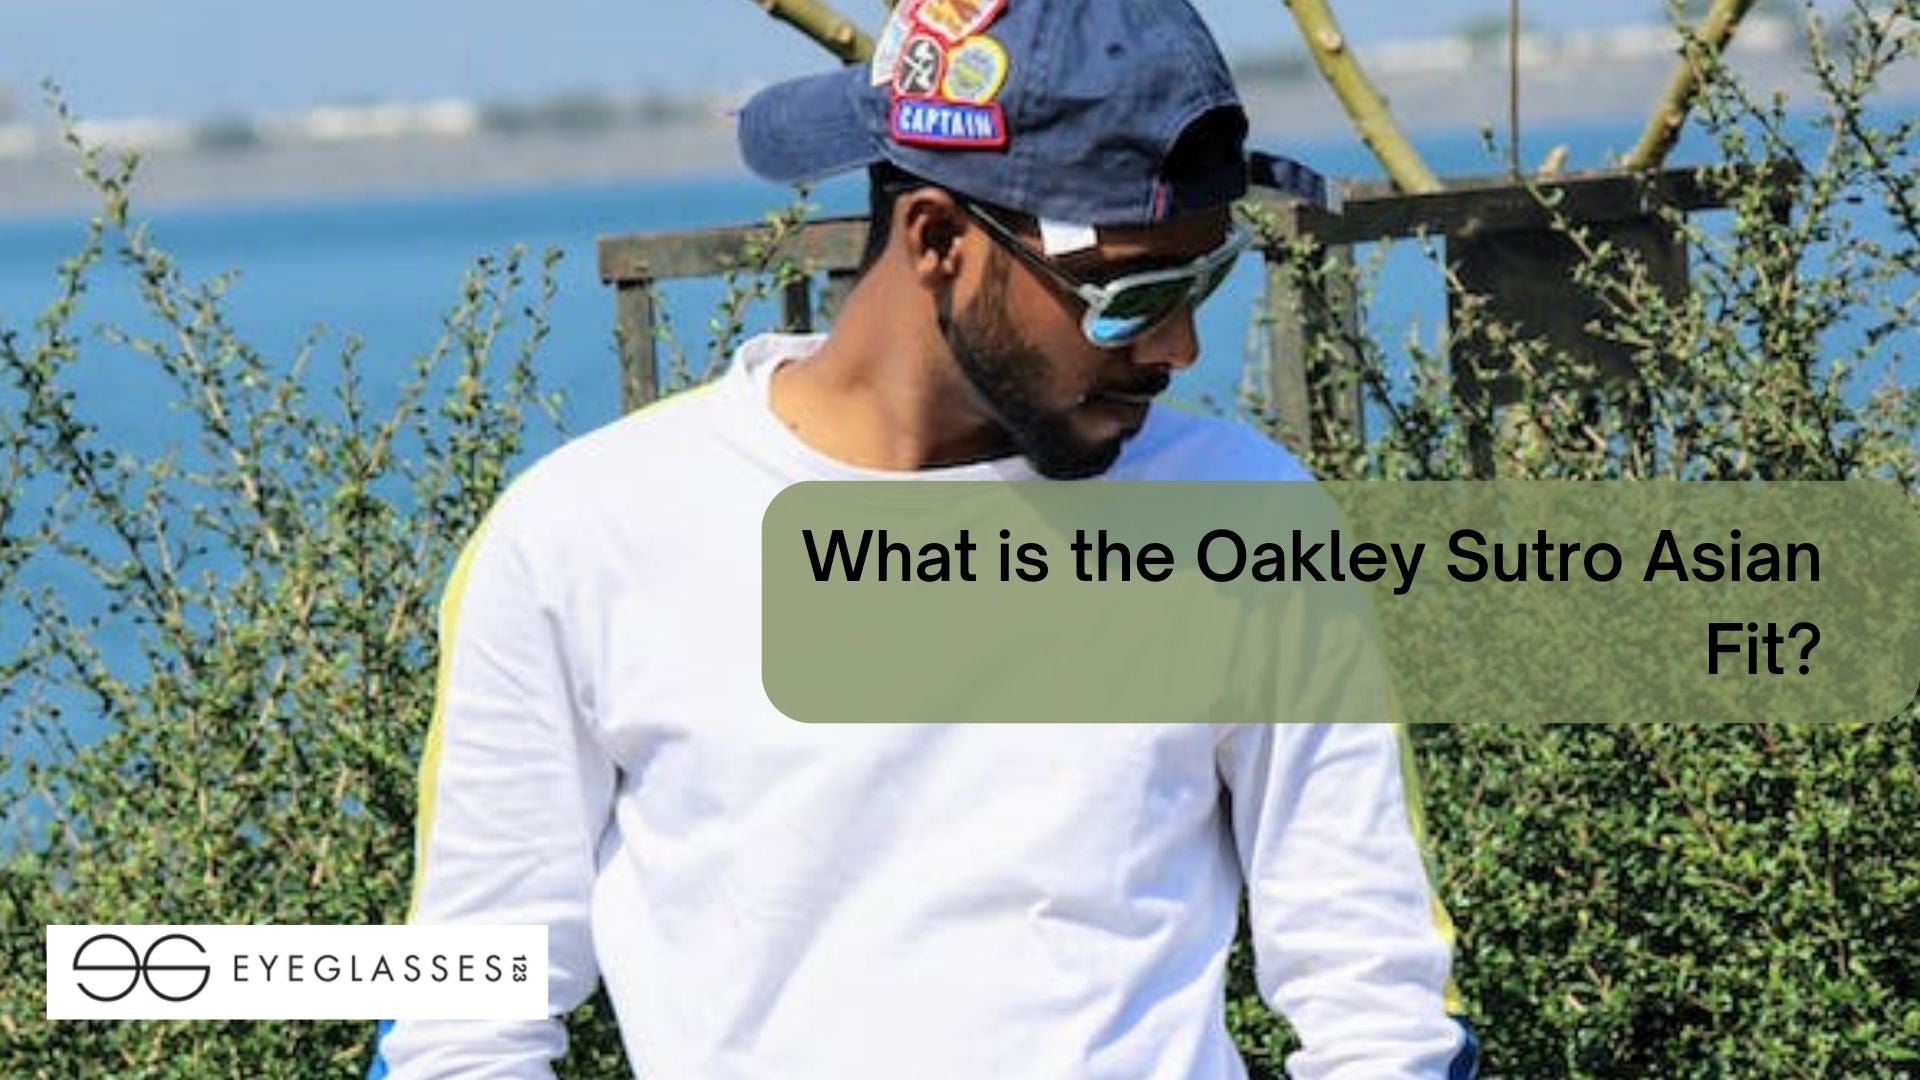 What is the Oakley Sutro Asian Fit?